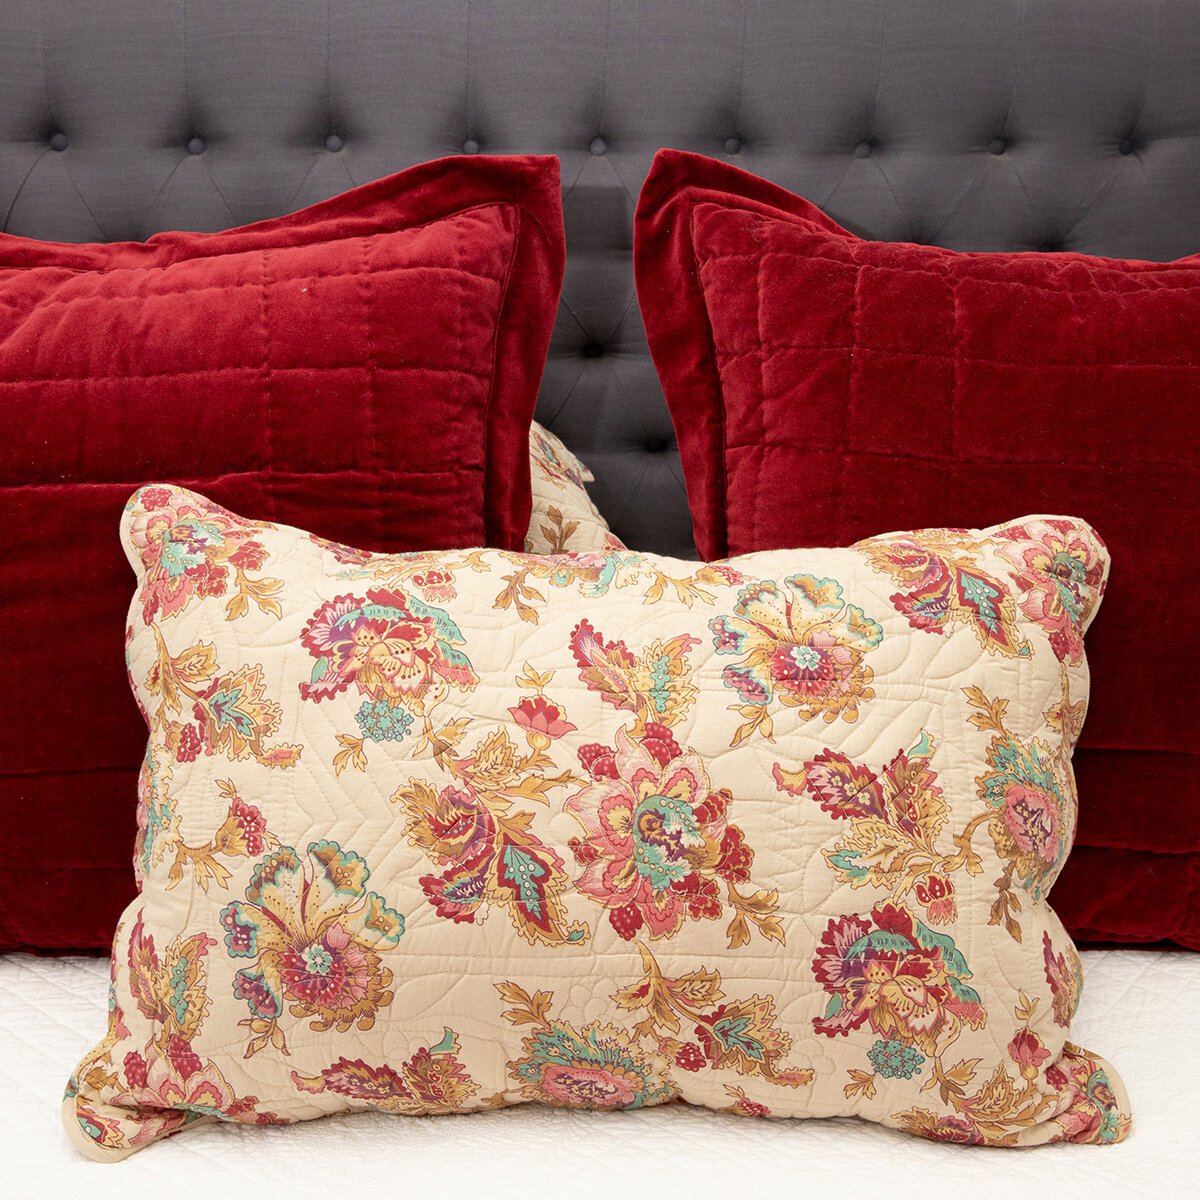 Hand Quilted Lush Comforter with Straight Edging - Crimson - Notbrand